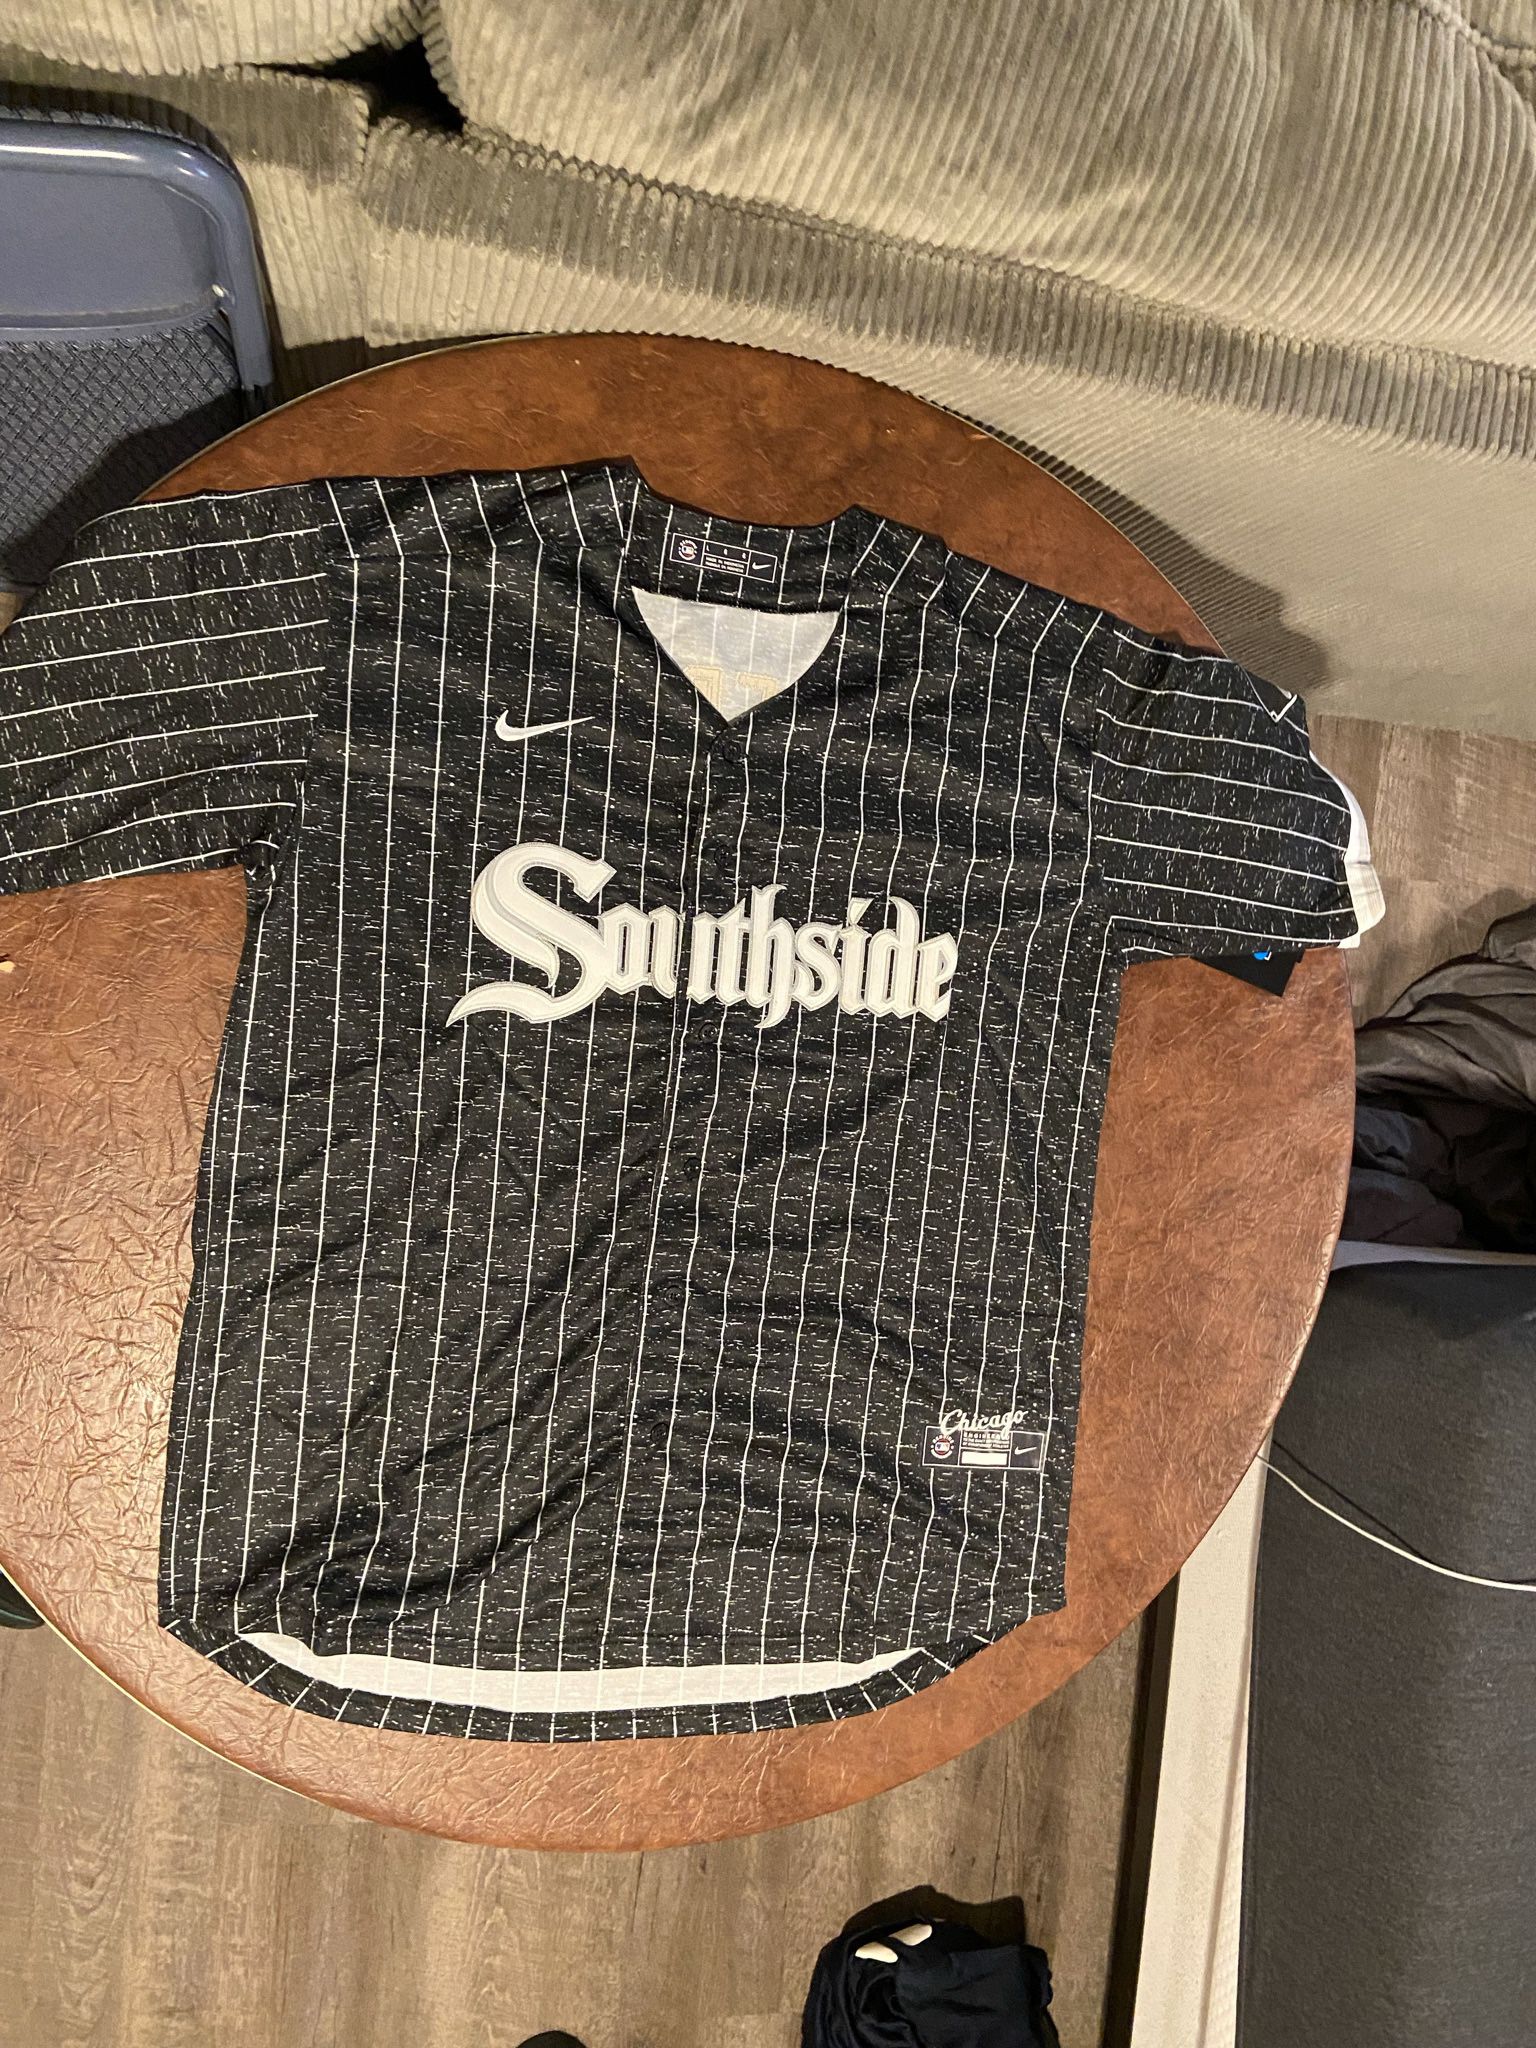 chicago southside jersey